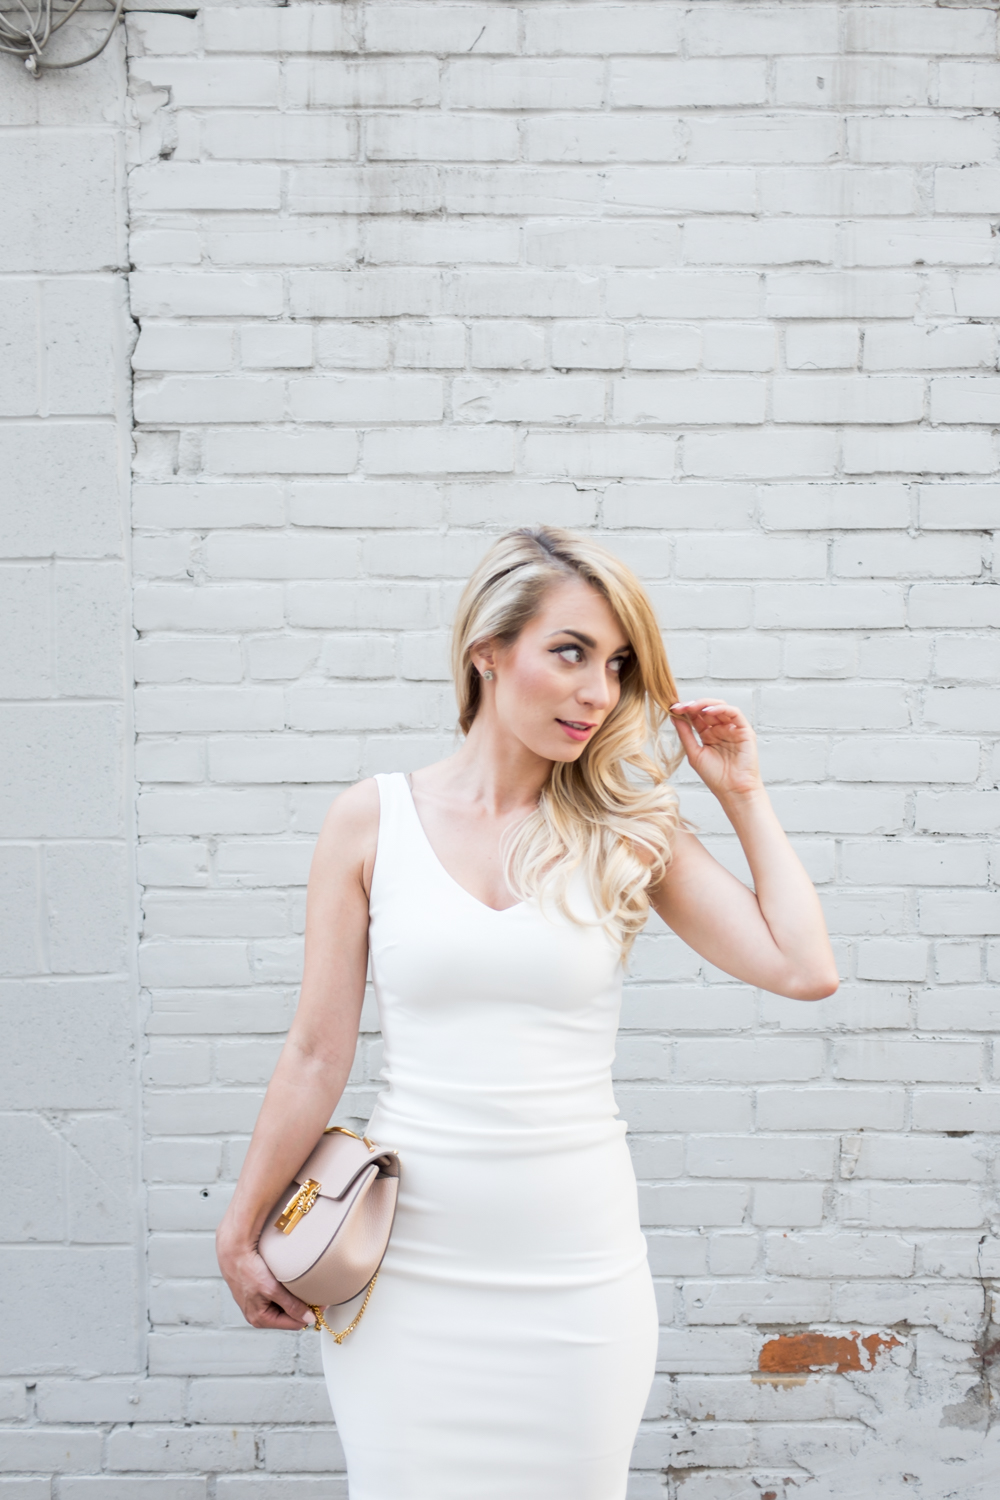 OOTD - What I Wore To The Nordstrom Gala | La Petite Noob | A Toronto ...